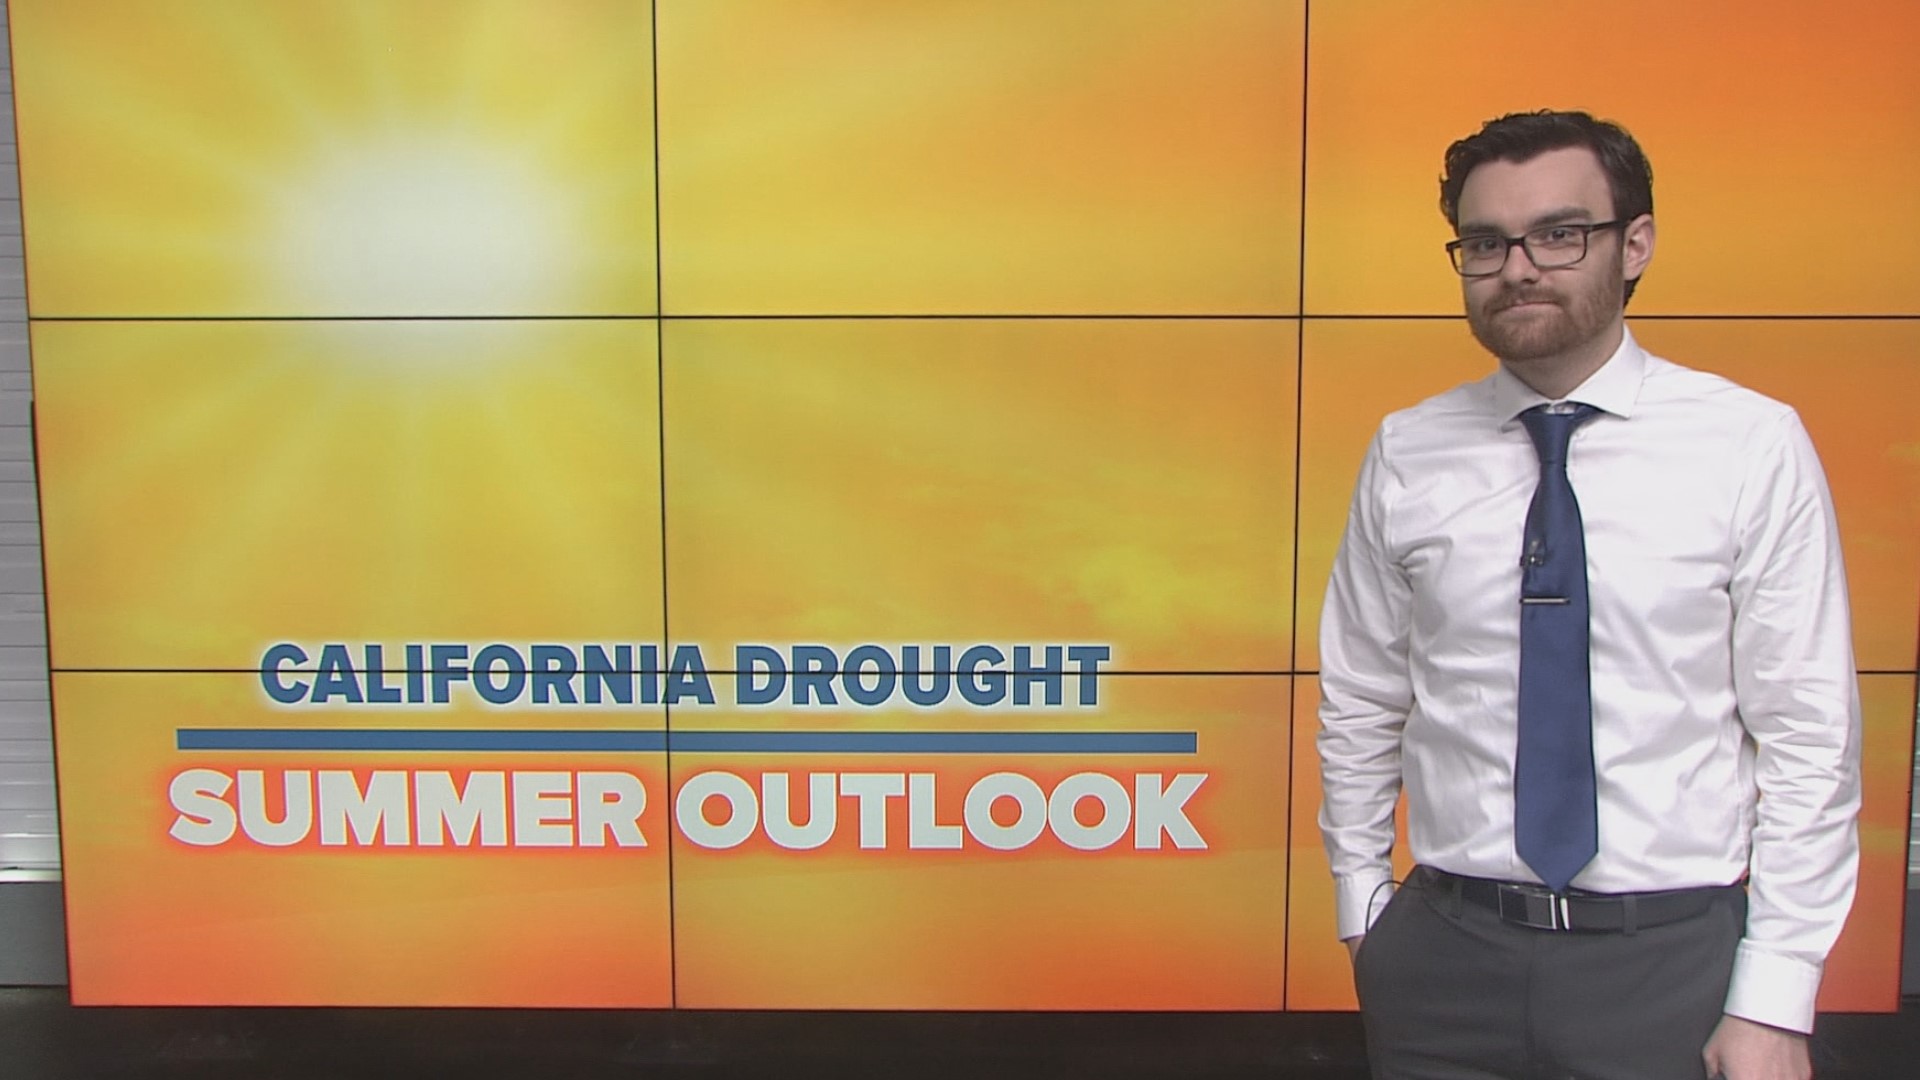 ABC10 meteorologist Brenden Mincheff talks long-range models and the Summer outlook in California. Plus, a $2 billion dollar water recycling facility in Sacramento.